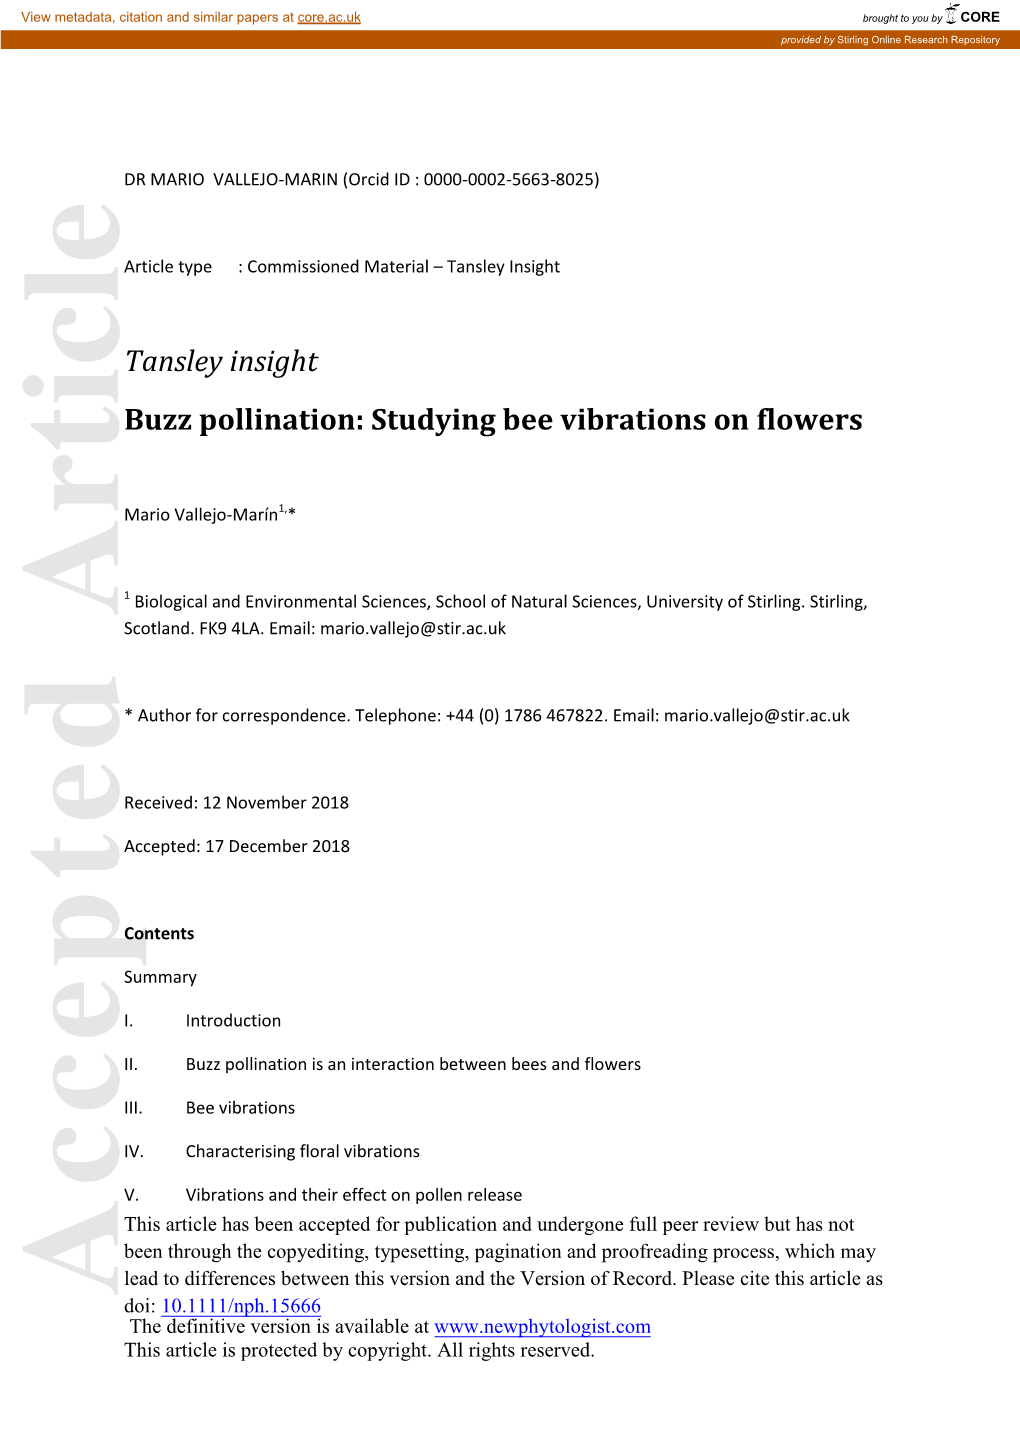 Buzz Pollination Is Aninteraction Between Beesand Flowers Introduction II